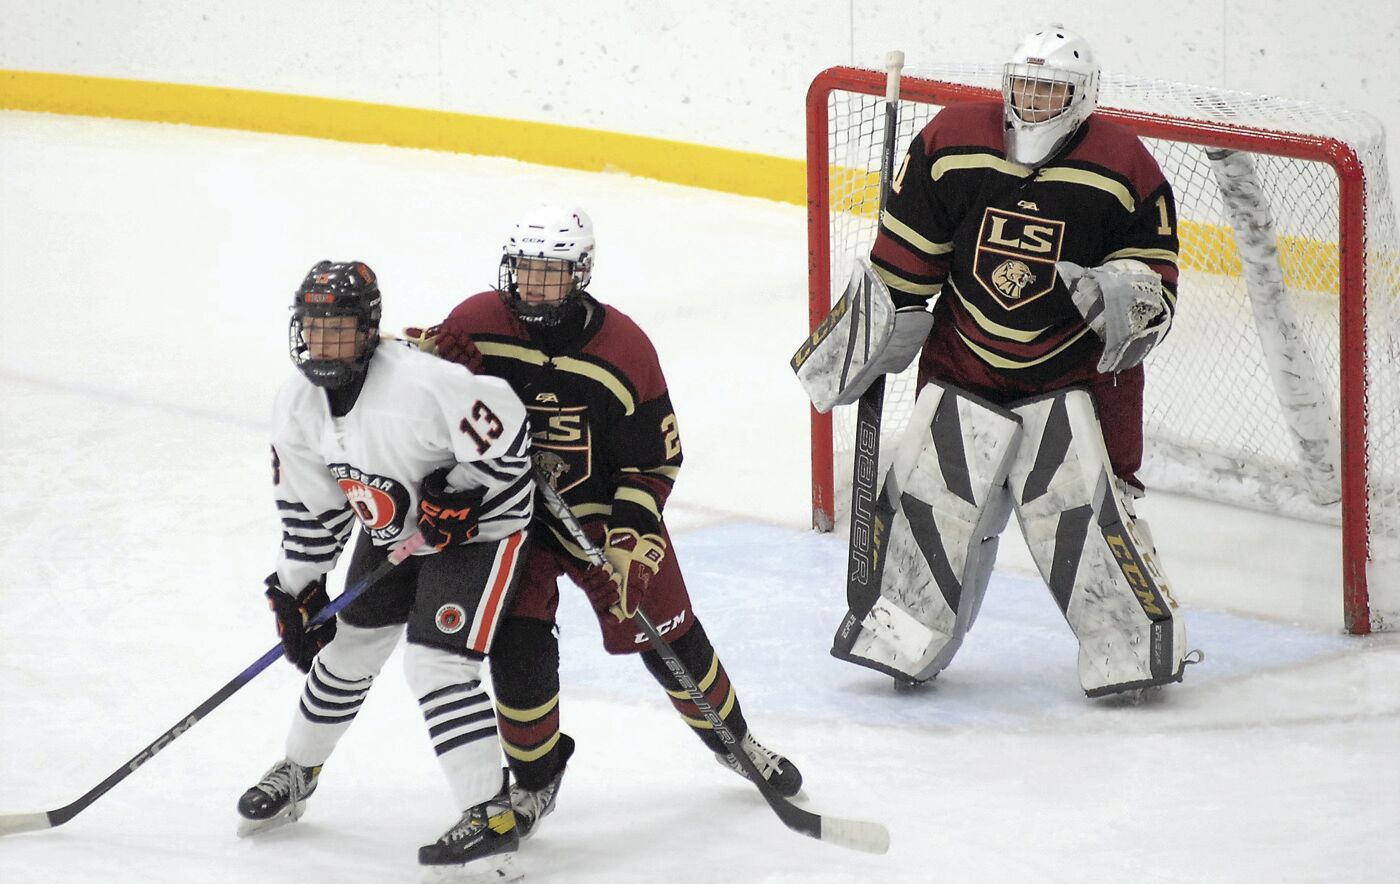 Holiday highlights: South girls win their own hockey tourney